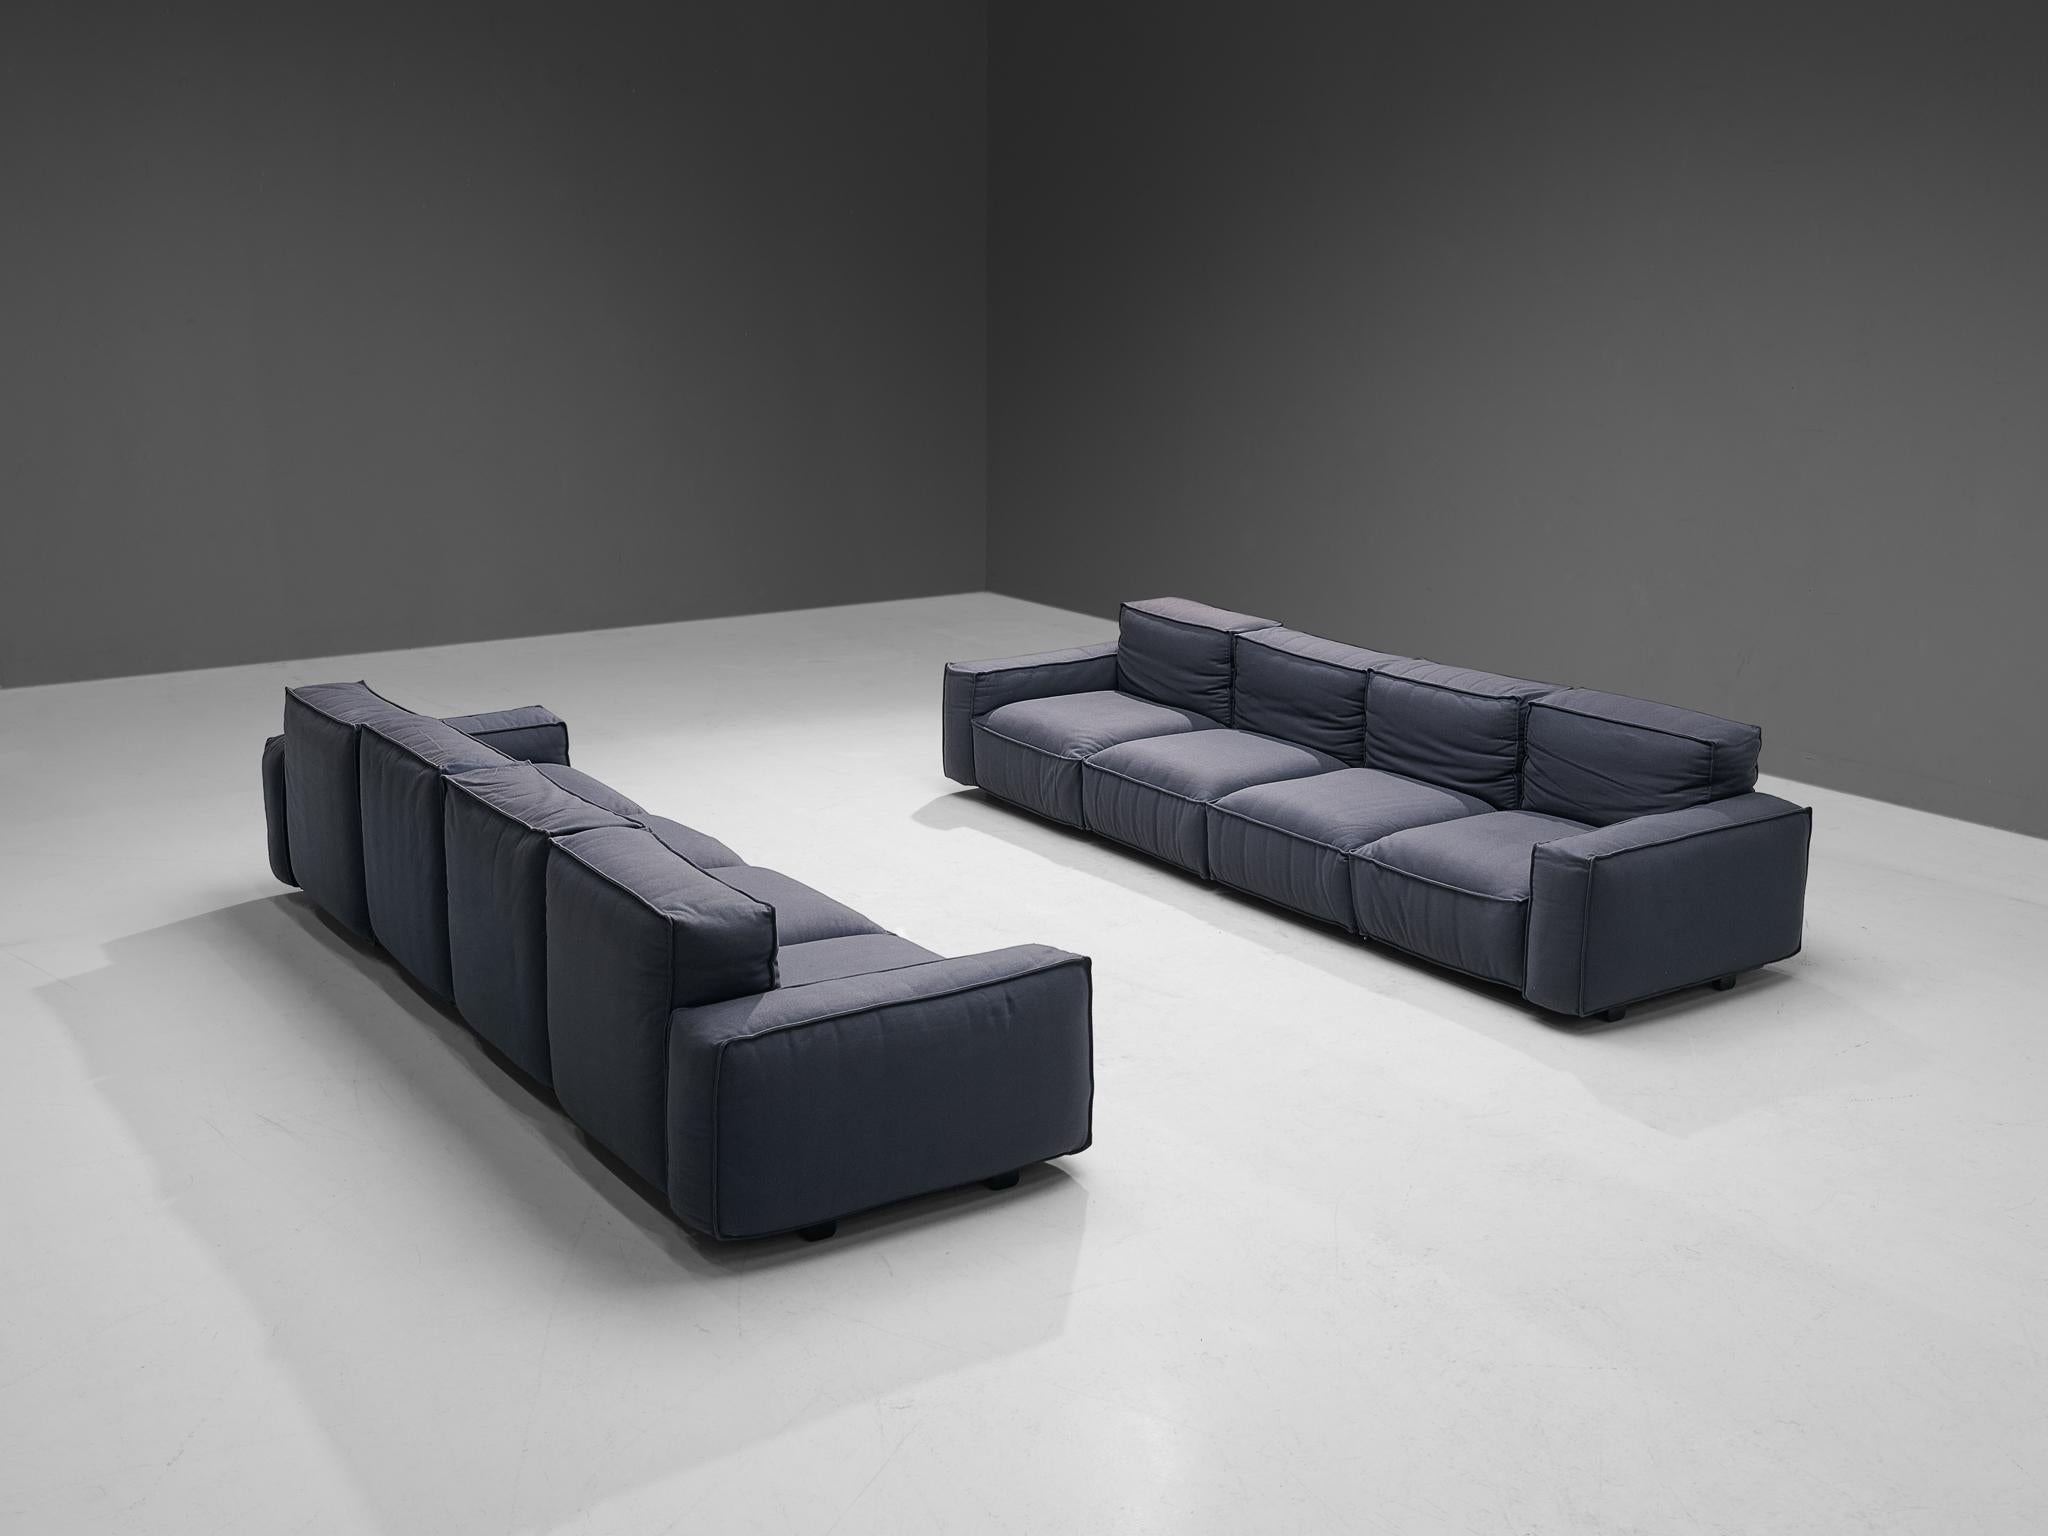 Mario Marenco for Arflex, modular four-seater sofa's, model 'Marechiaro', wool, plastic, metal, Italy, circa 1976. 

These well-designed sofa's by Mario Marenco for Arflex are fully executed in deep blue wool upholstery that contributes to the whole